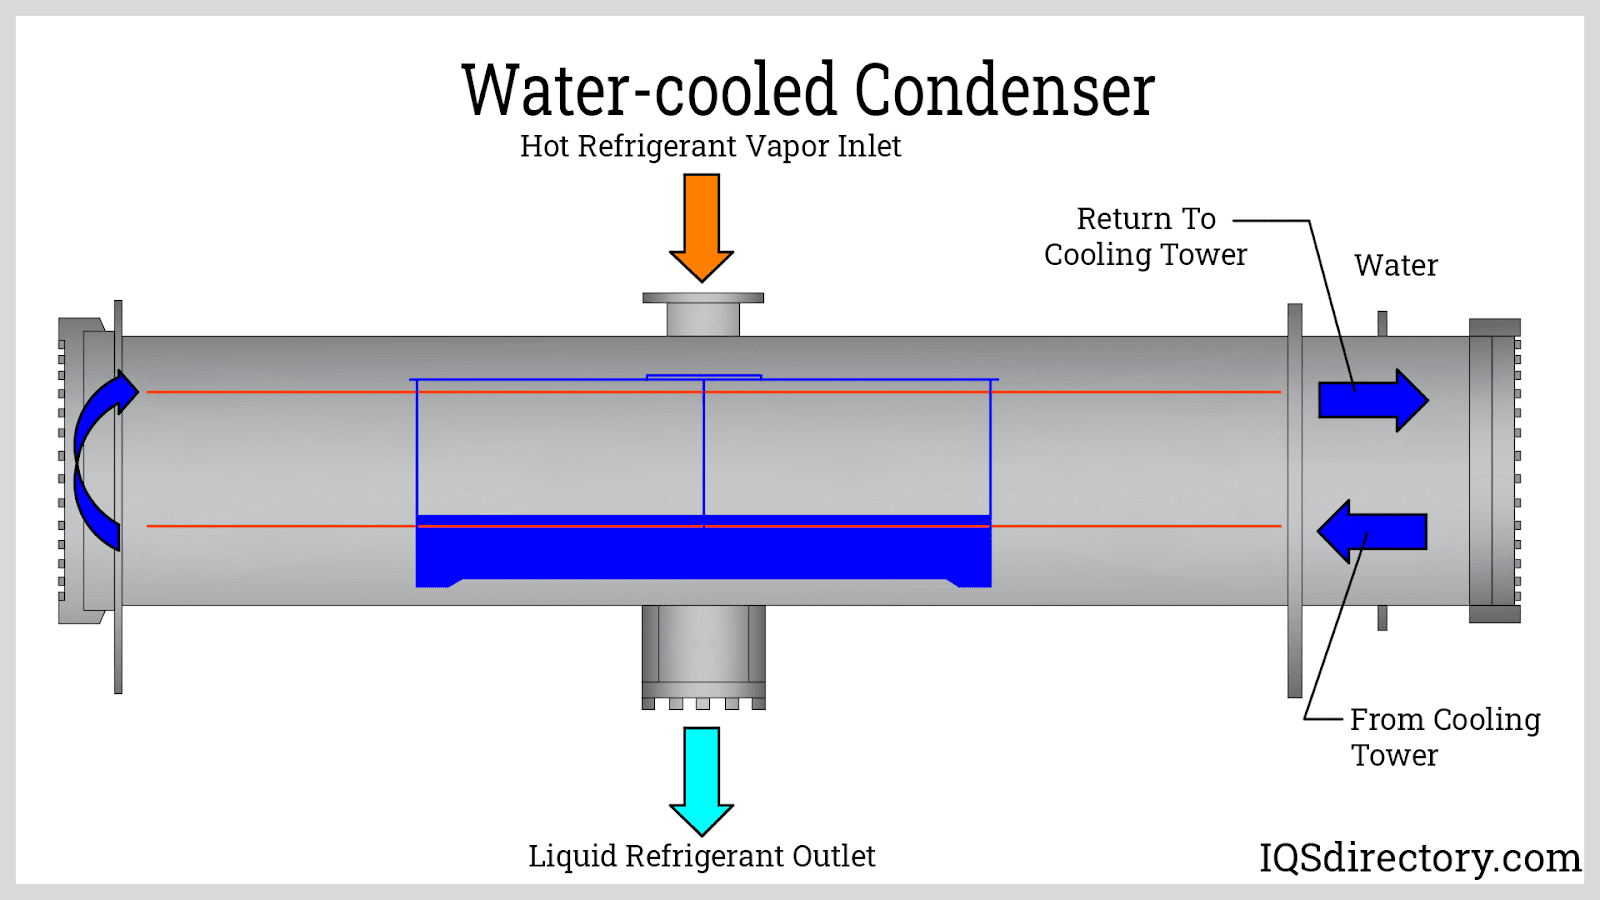 Water-cooled Condenser